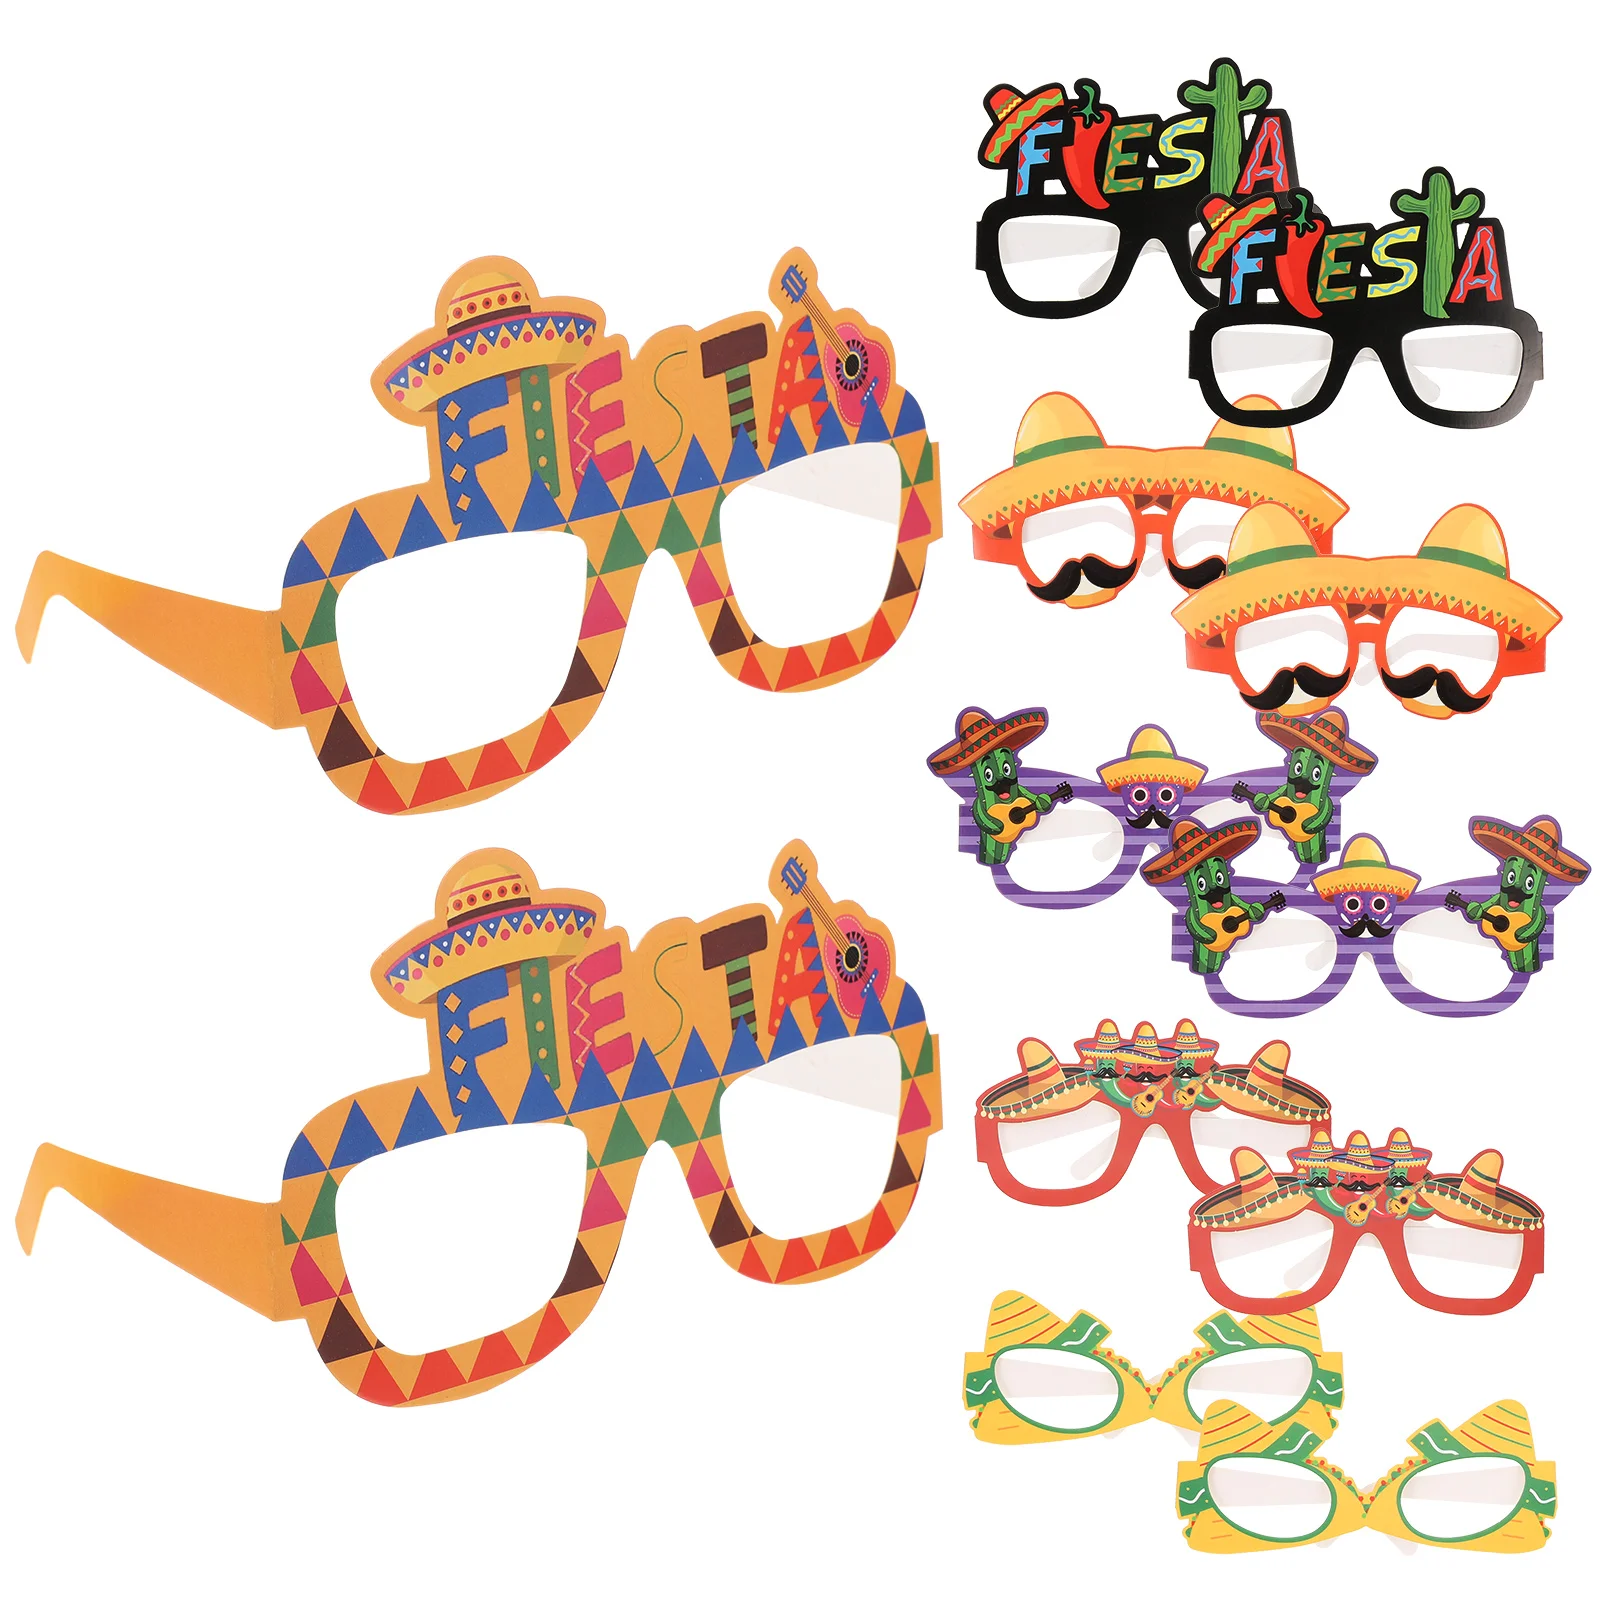 

12 Pcs Mexican Glasses Funny Adults Party Favors Makeup Themed Decor Cinco Mayo Decorations Festival Eyeglasses Props Paper